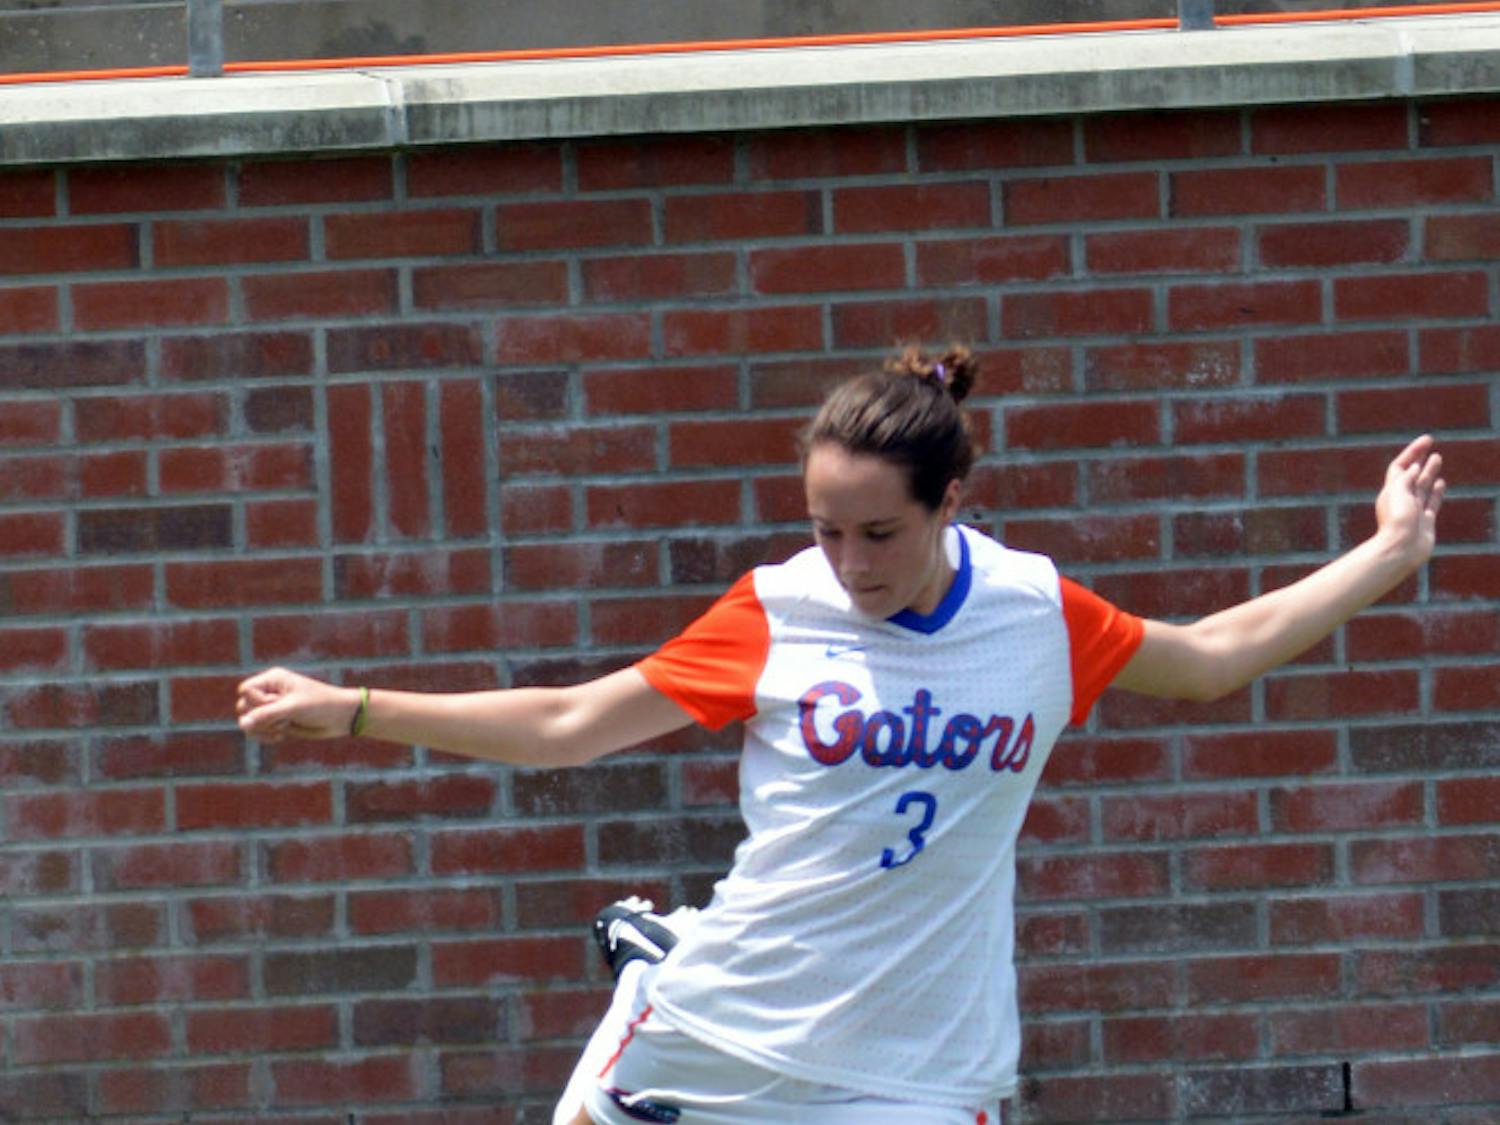 Brooke Smith kicks a corner kick during Florida's 2-0 win against South Florida at Donald R. Dizney Stadium. Smith was one of four Gators to score a goal in Florida's 4-0 win against Oklahoma State on Sunday.